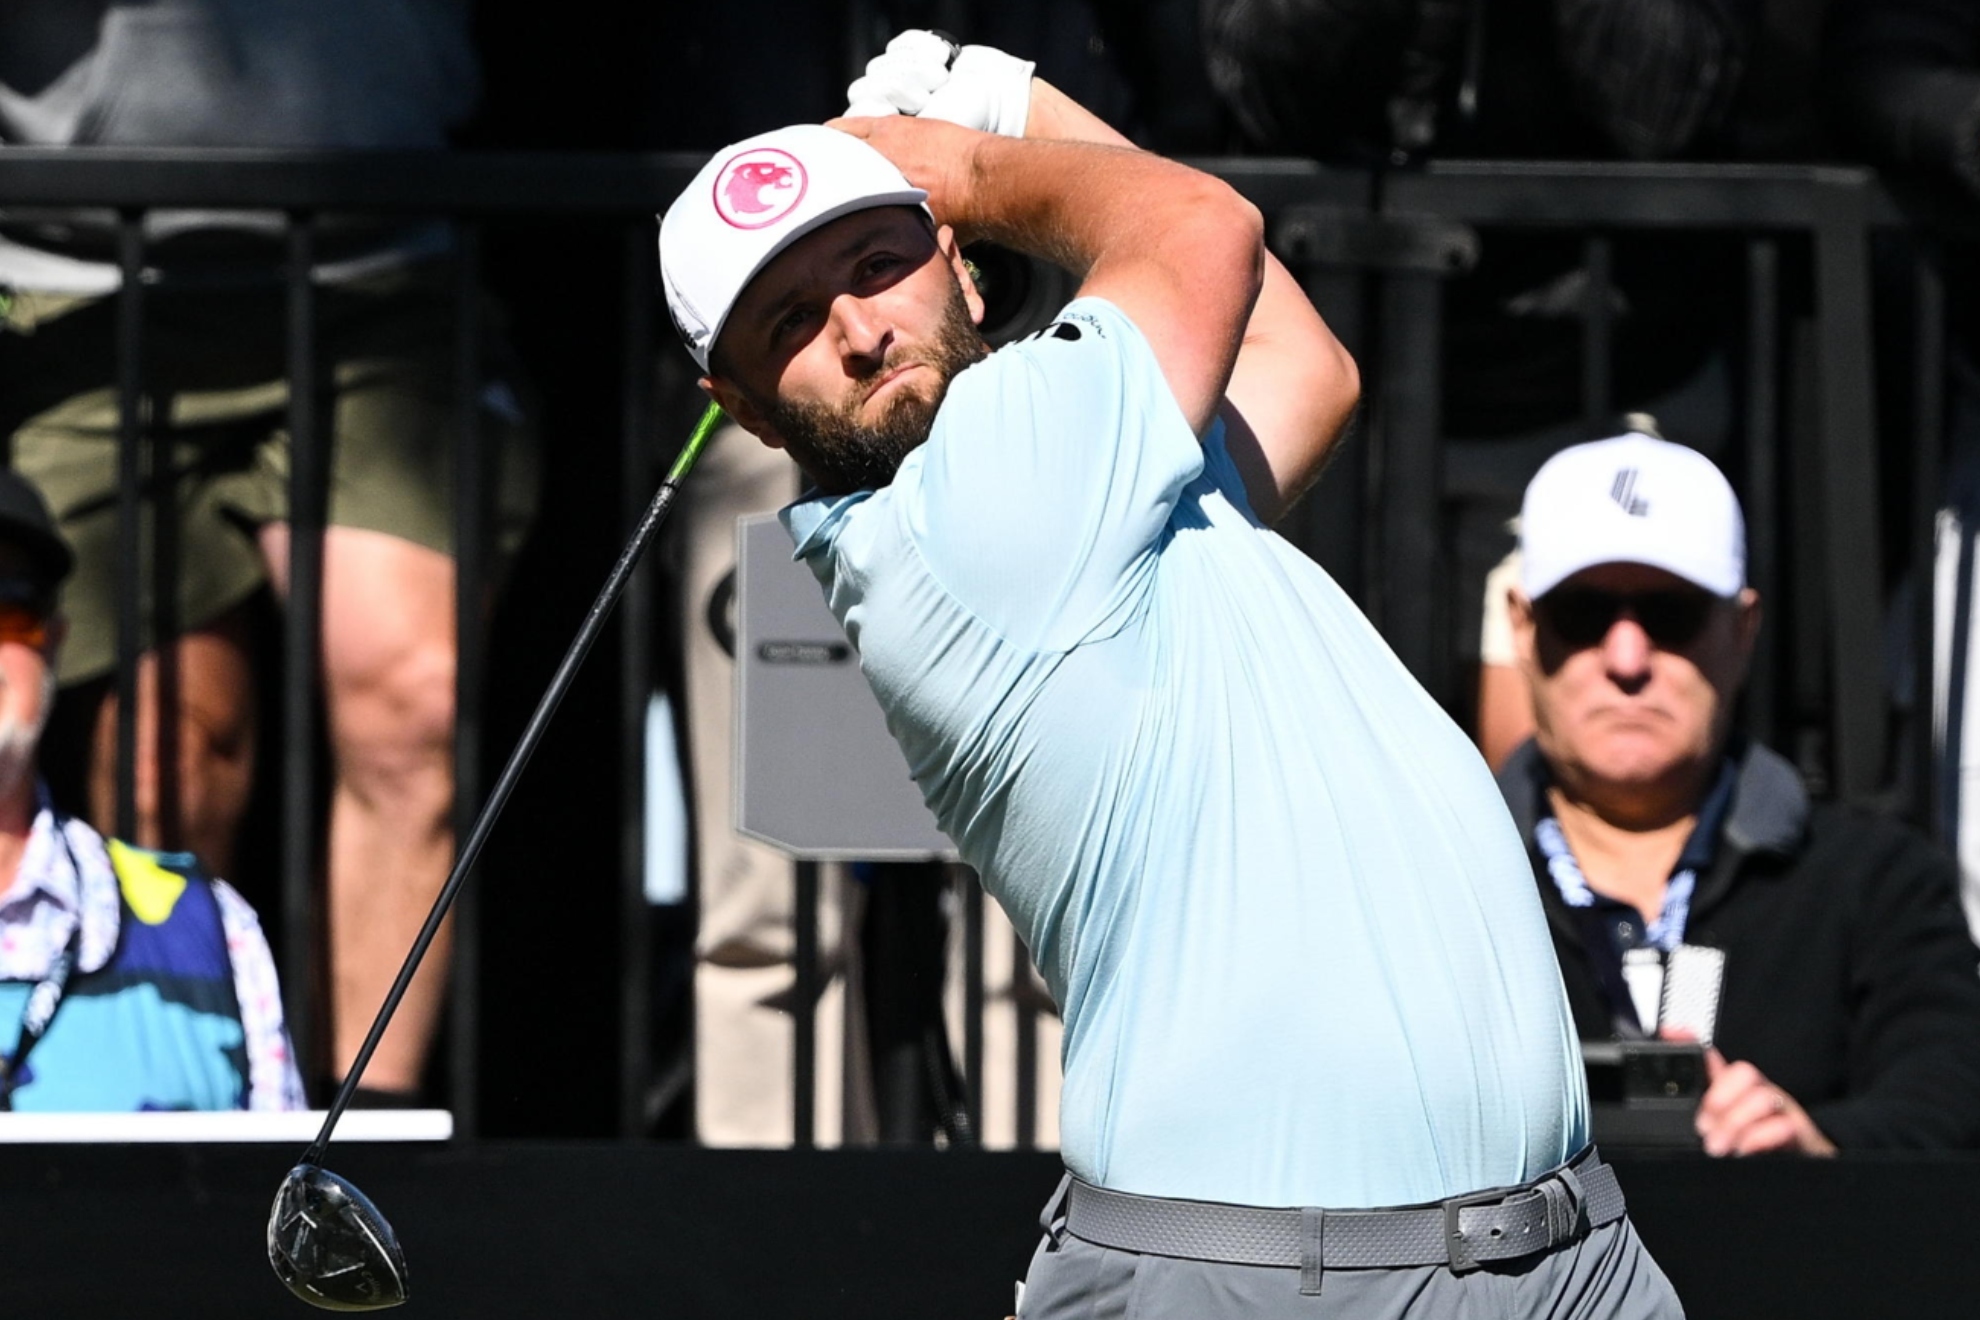 Jon Rahm and his presence in the Ryder Cup according to the DP World Tour: There has been a misunderstanding...